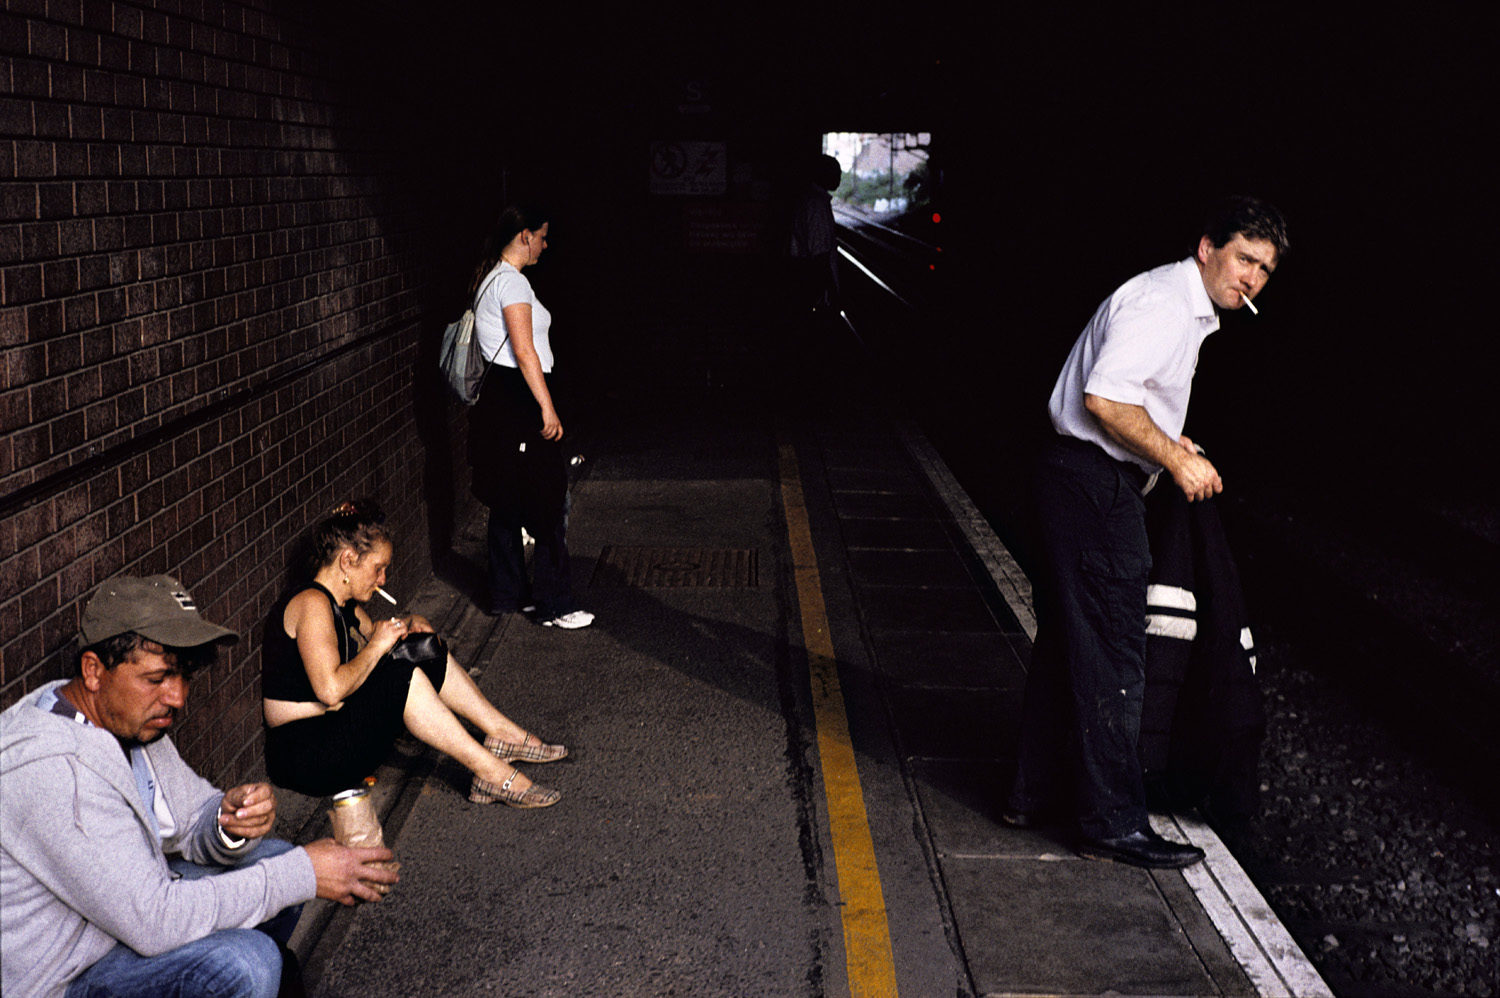 A group of people wait on a station platform in golden hour light, each absorbed in their own world, highlighting a moment of urban solitude.